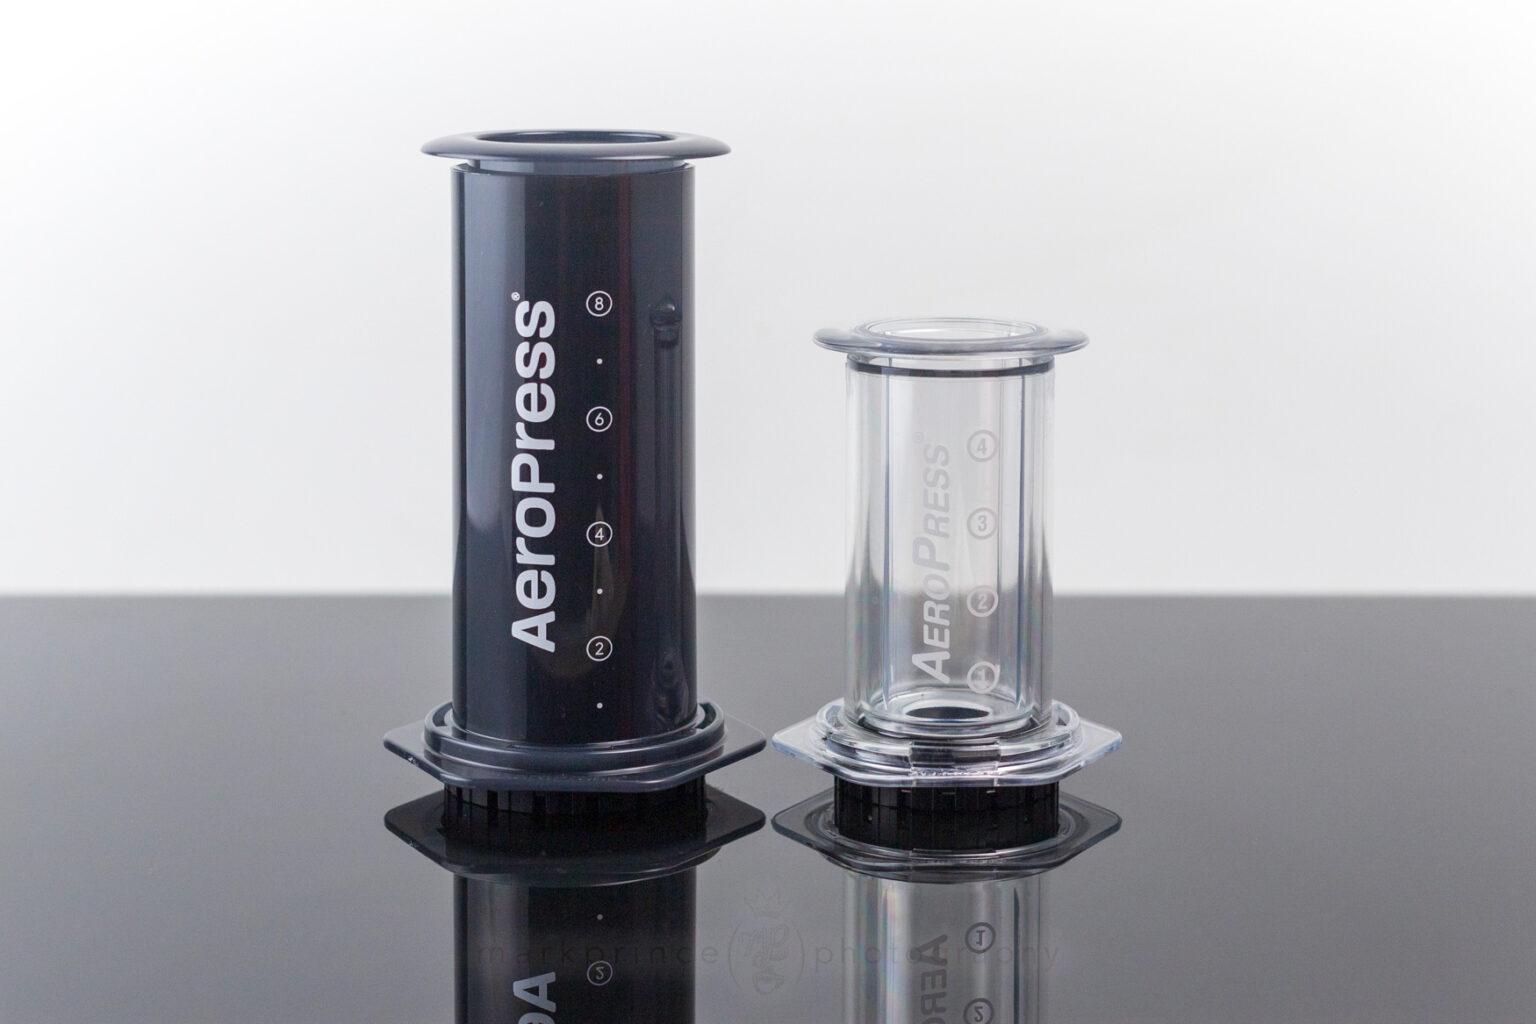 AeroPress Clear compared to the XL